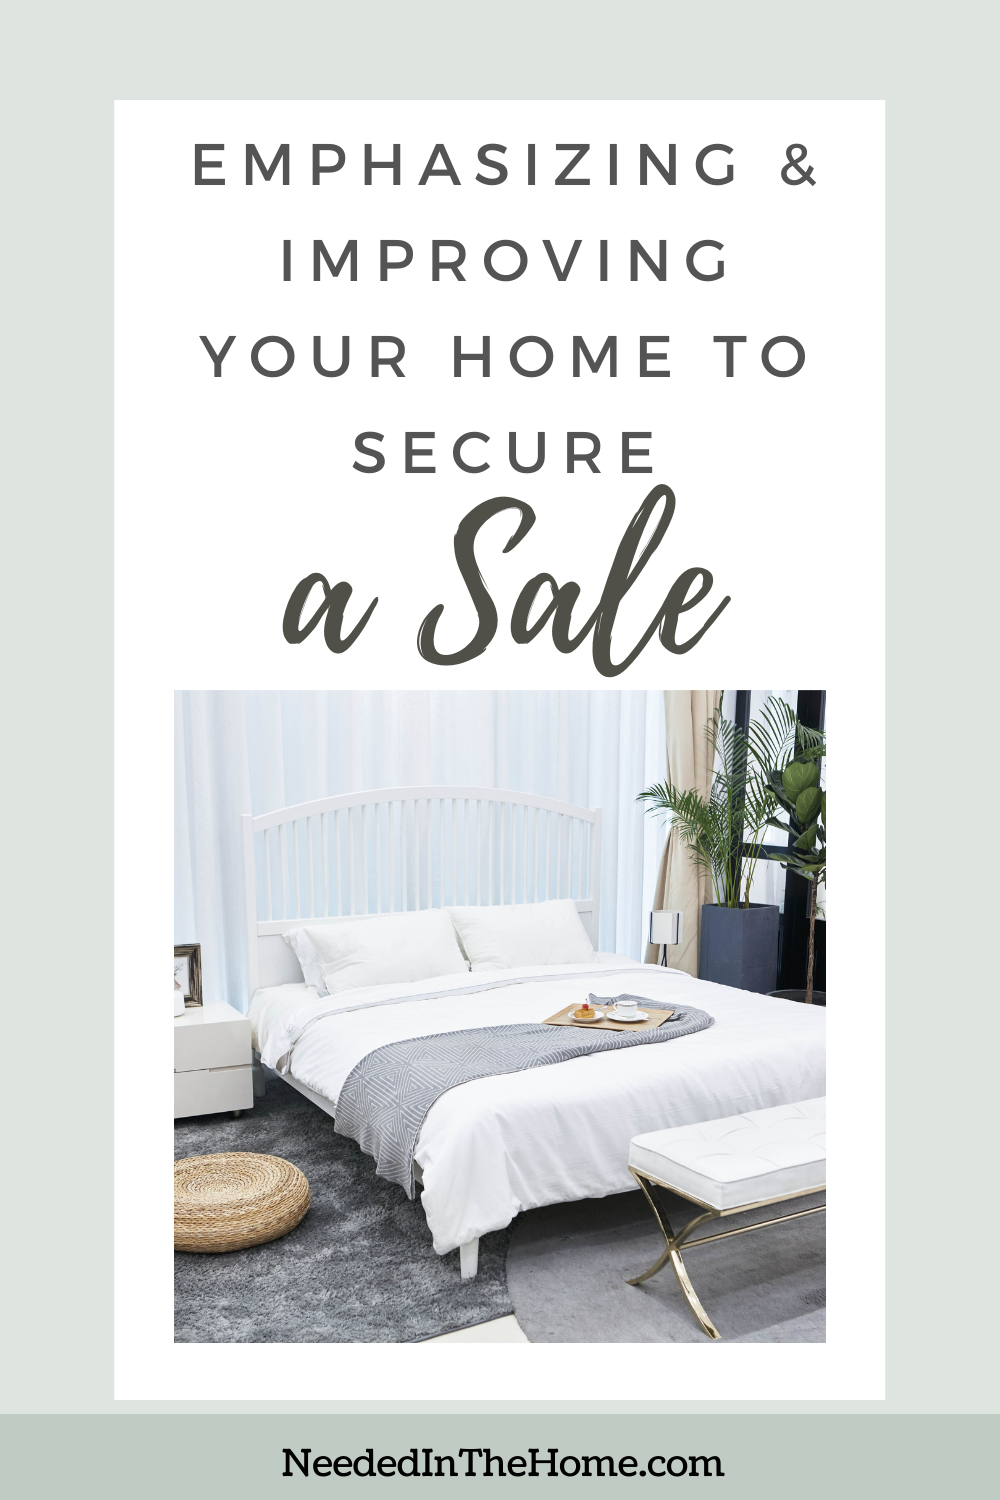 pinterest-pin-description emphasizing and improving your home to secure a sale neutral colored bedroom with breakfast tray and blanket staged on bed neededinthehome